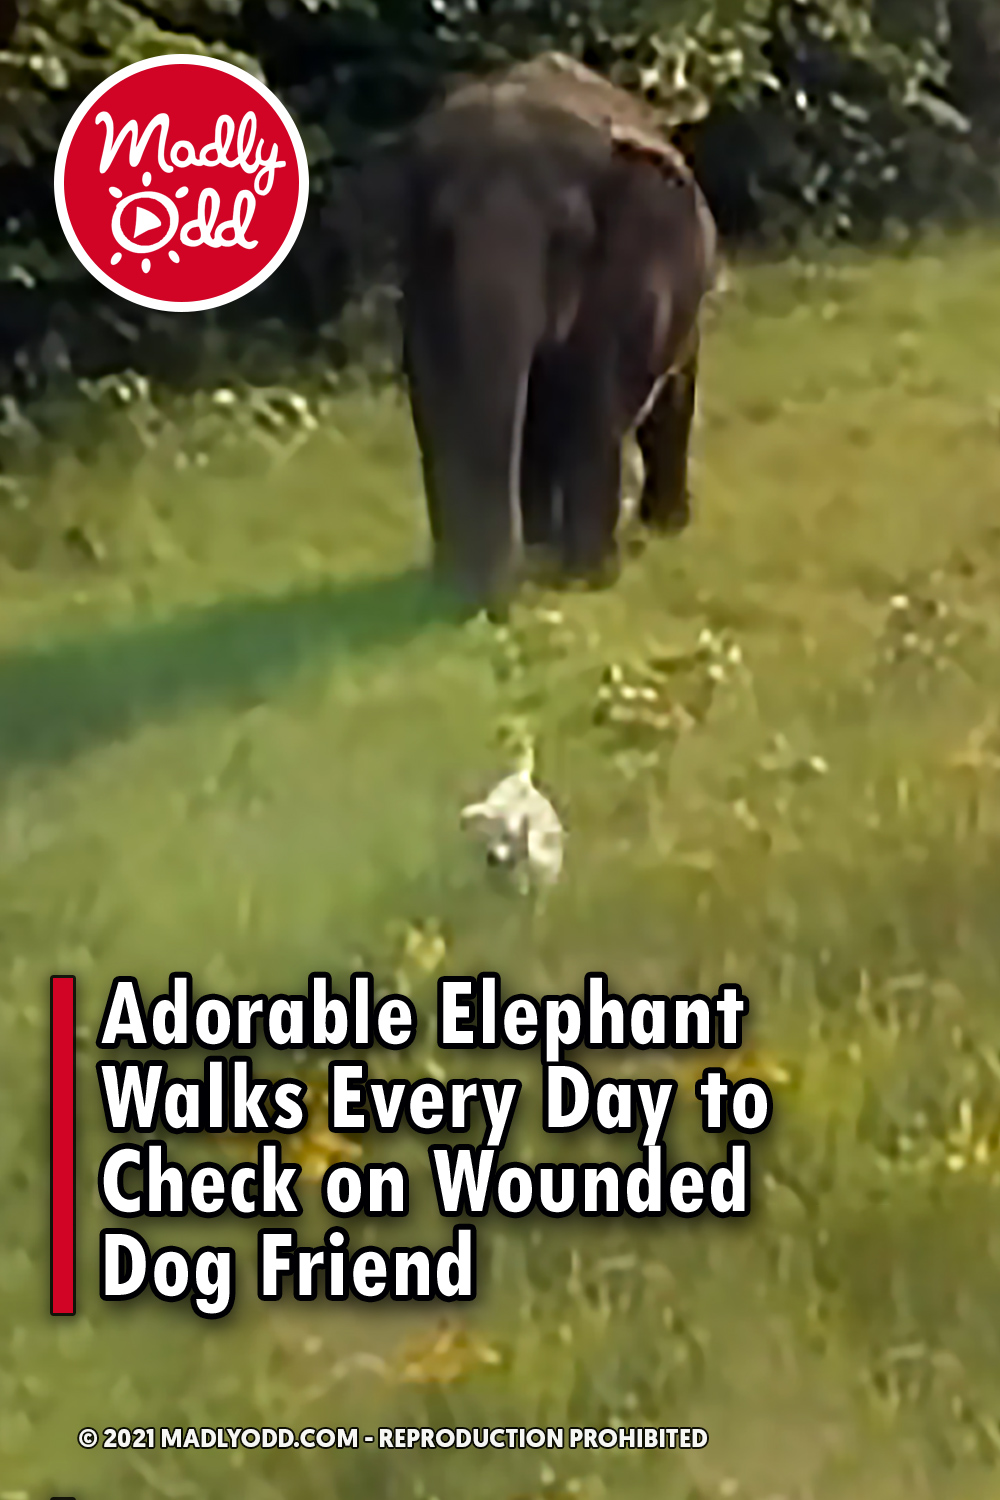 Adorable Elephant Walks Every Day to Check on Wounded Dog Friend